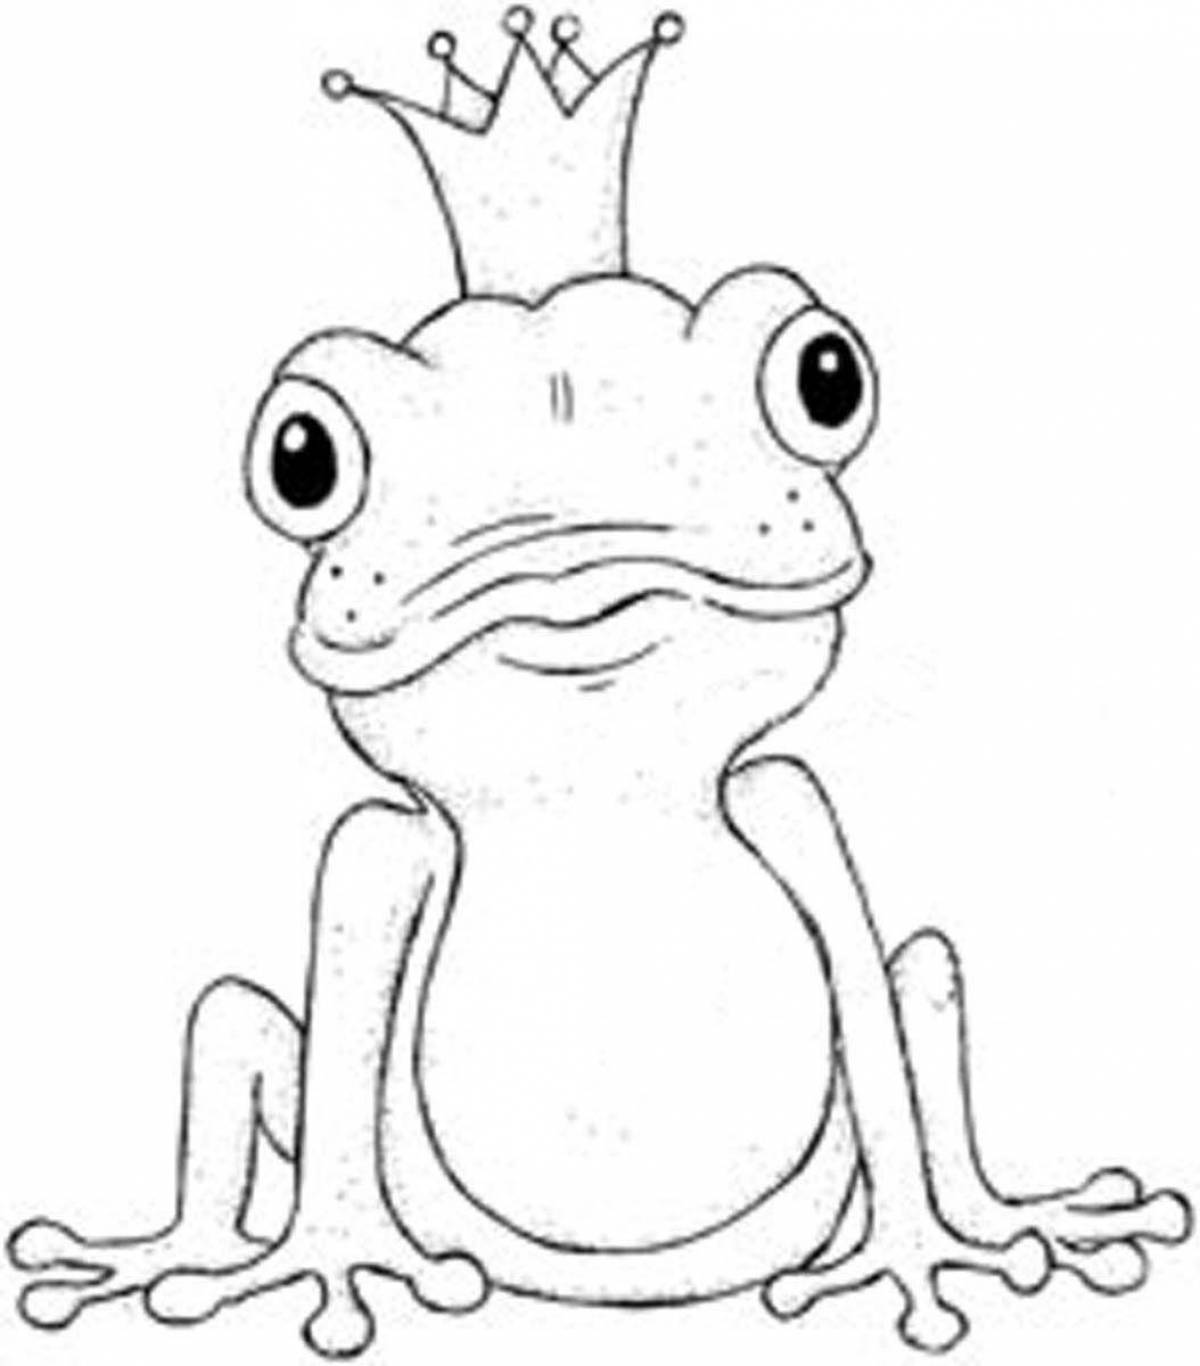 Froggy live coloring